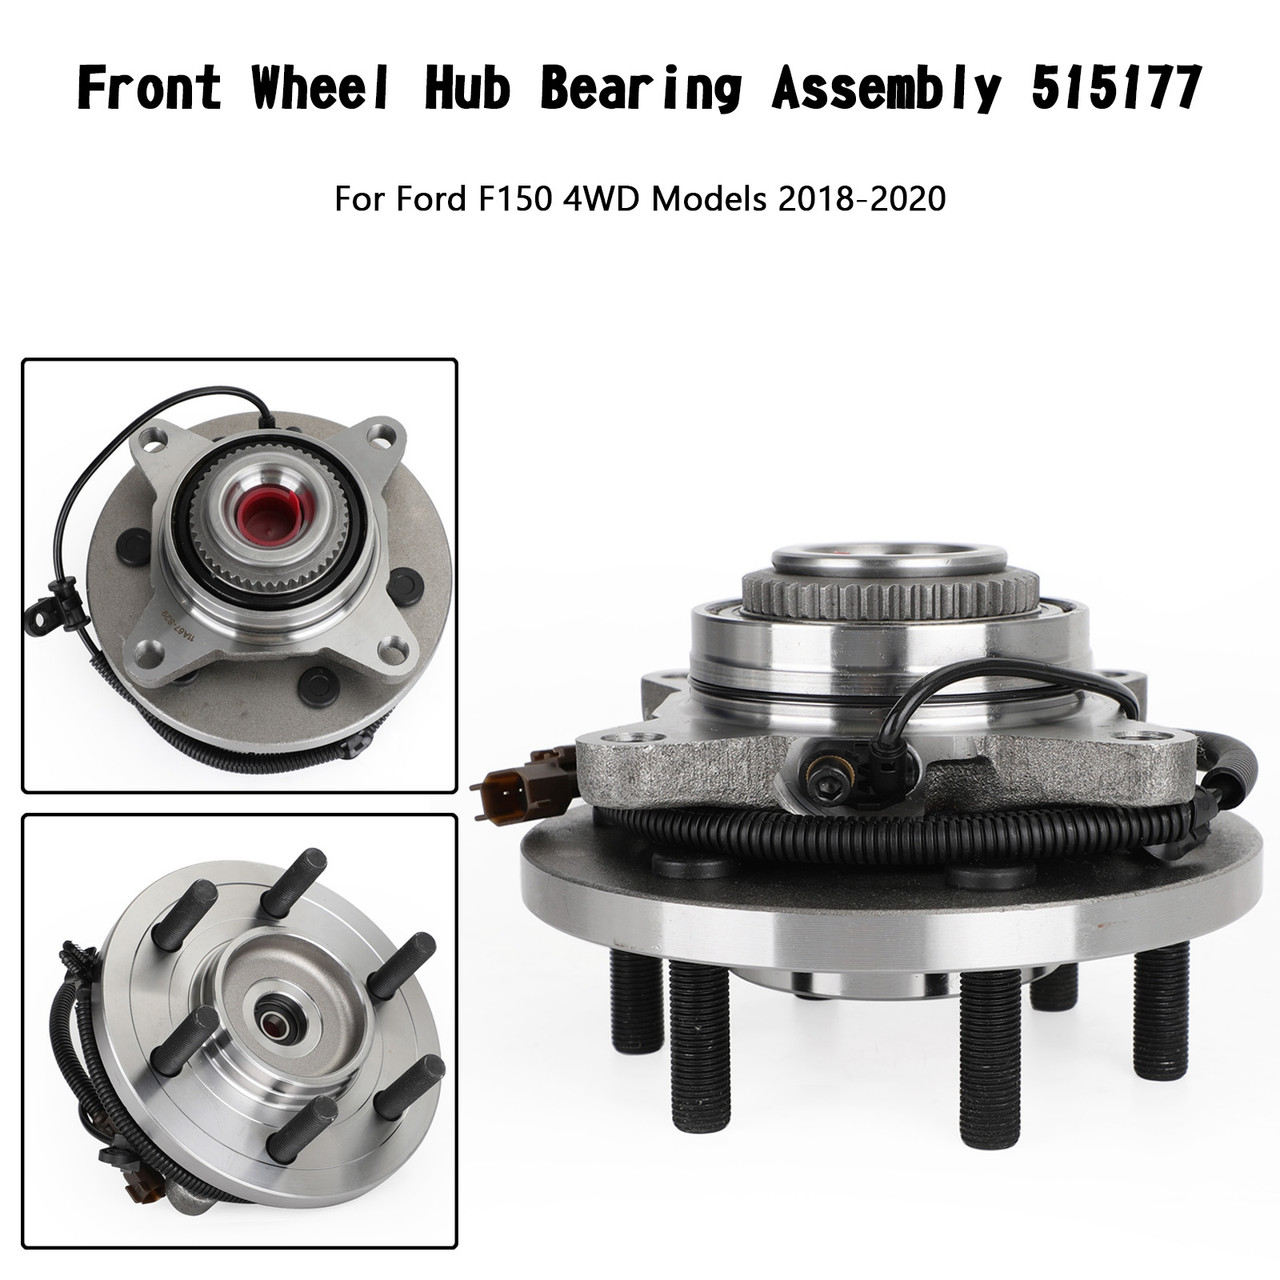 Front Wheel Hub Bearing Assembly 515177 For Ford F150 4WD Models 2018-2020